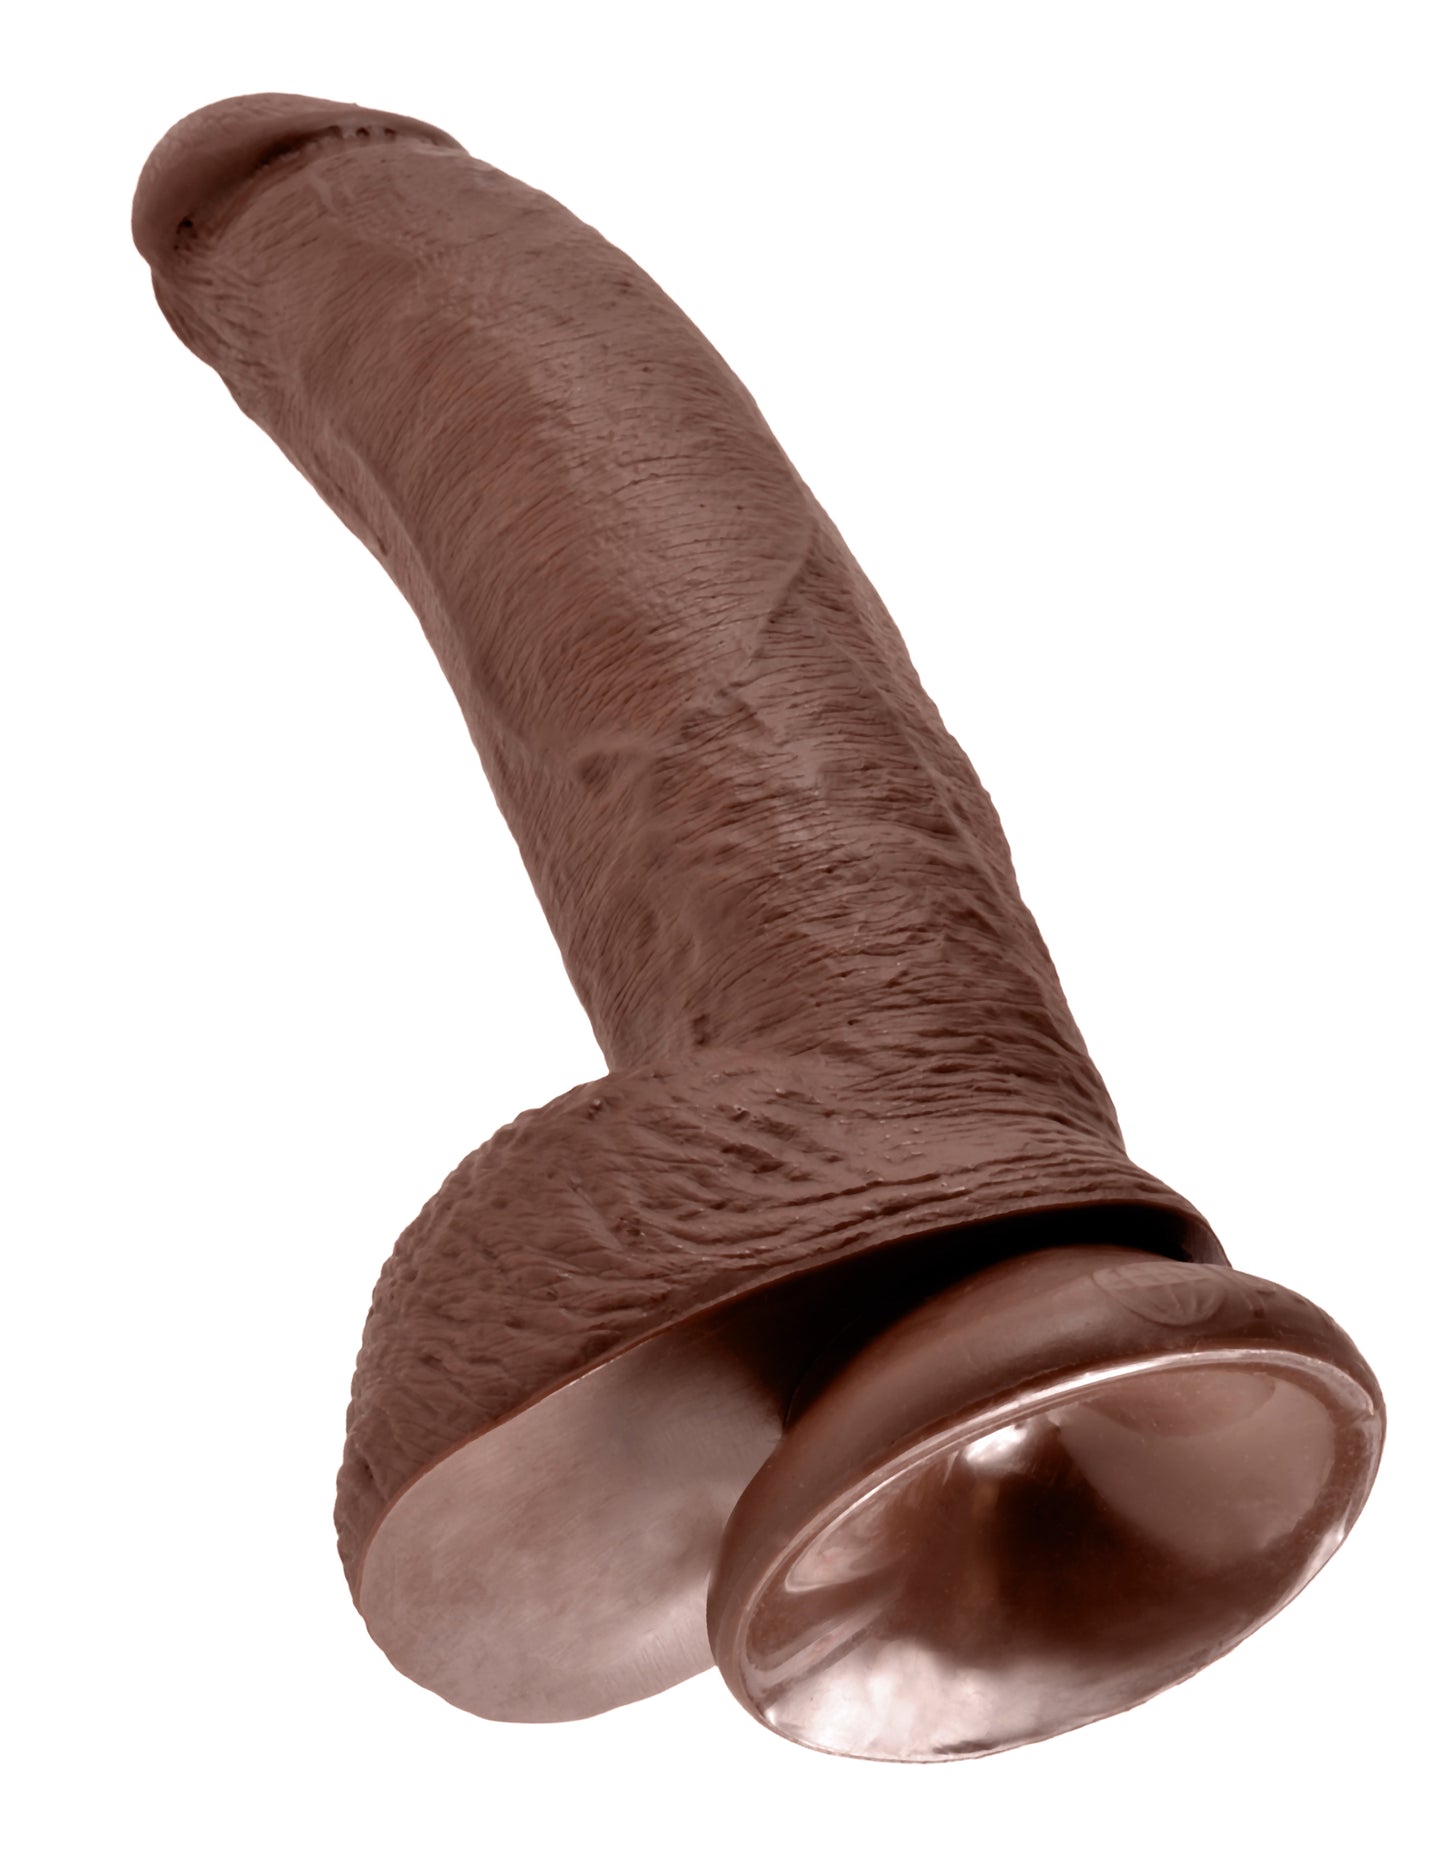 King Cock - 9 inch with balls Brown